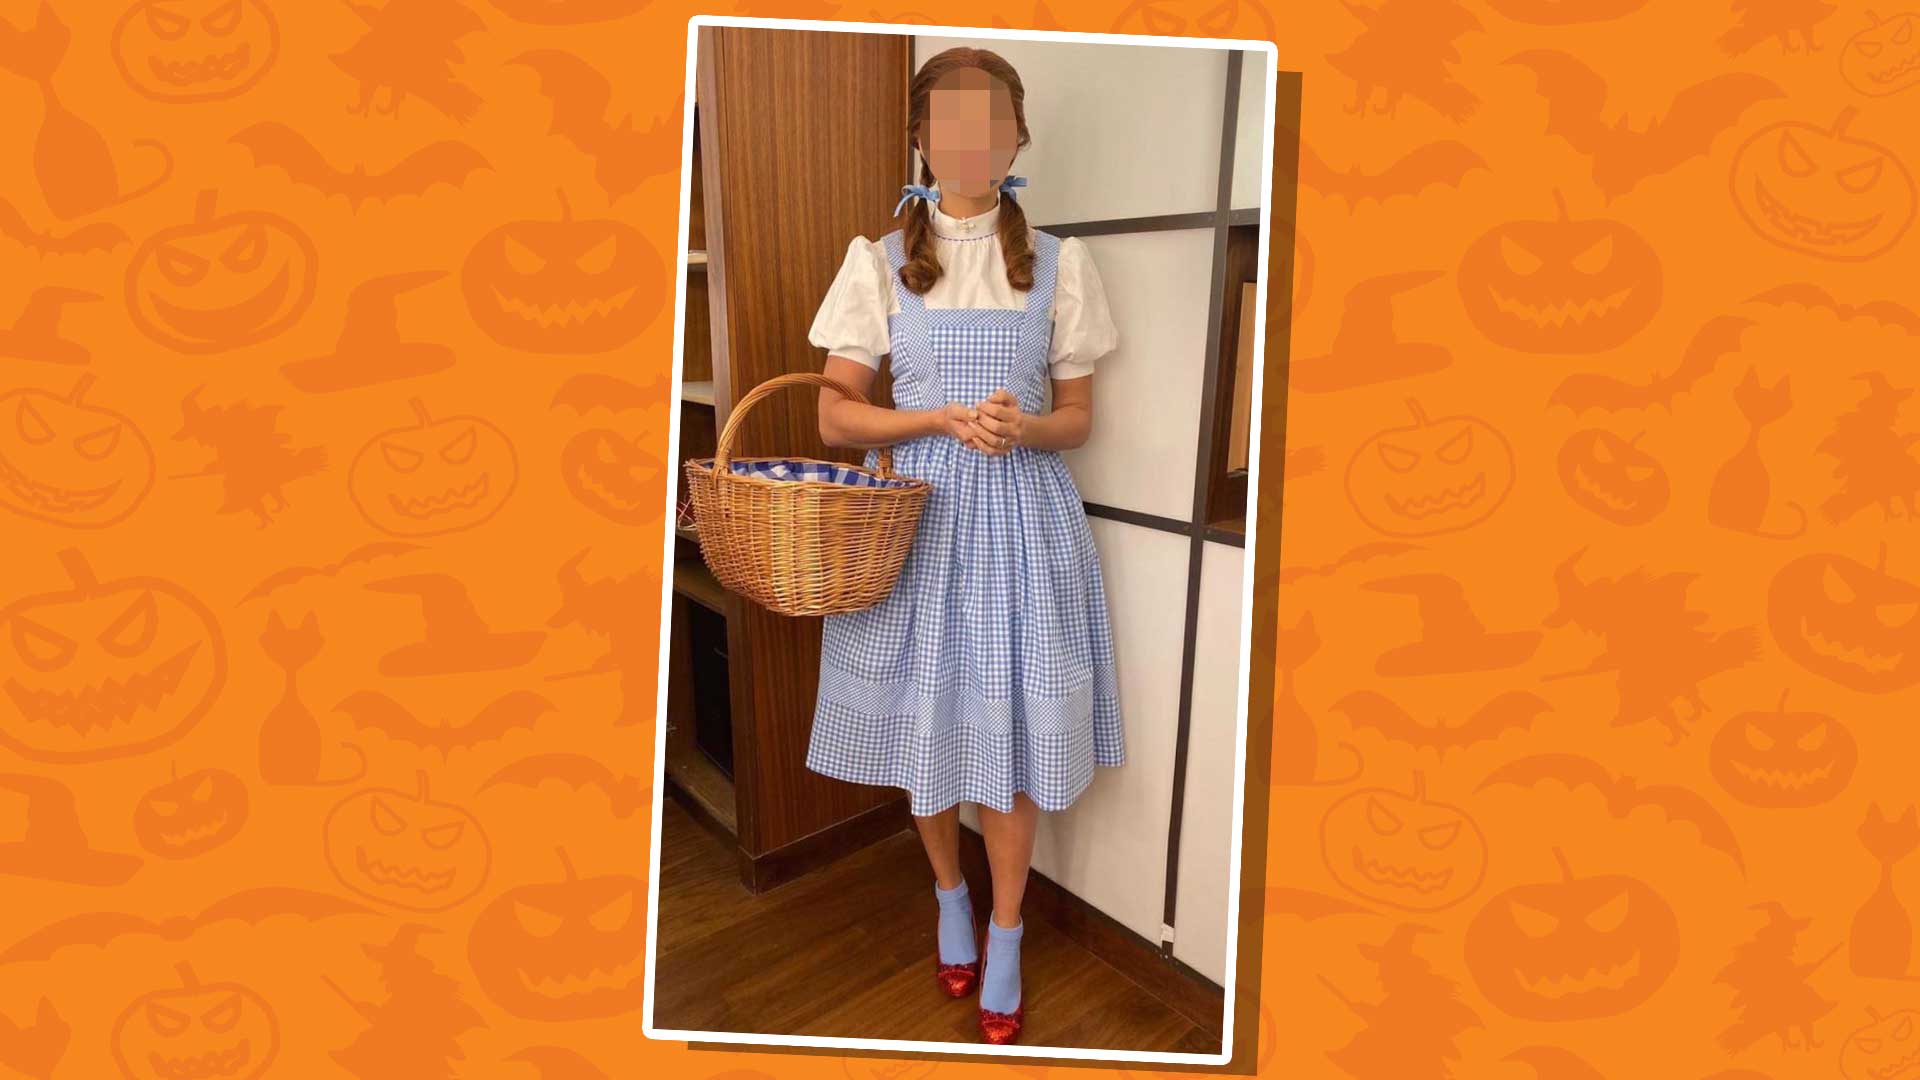 A daytime TV presenter dressed as Dorothy from the Wizard of Oz